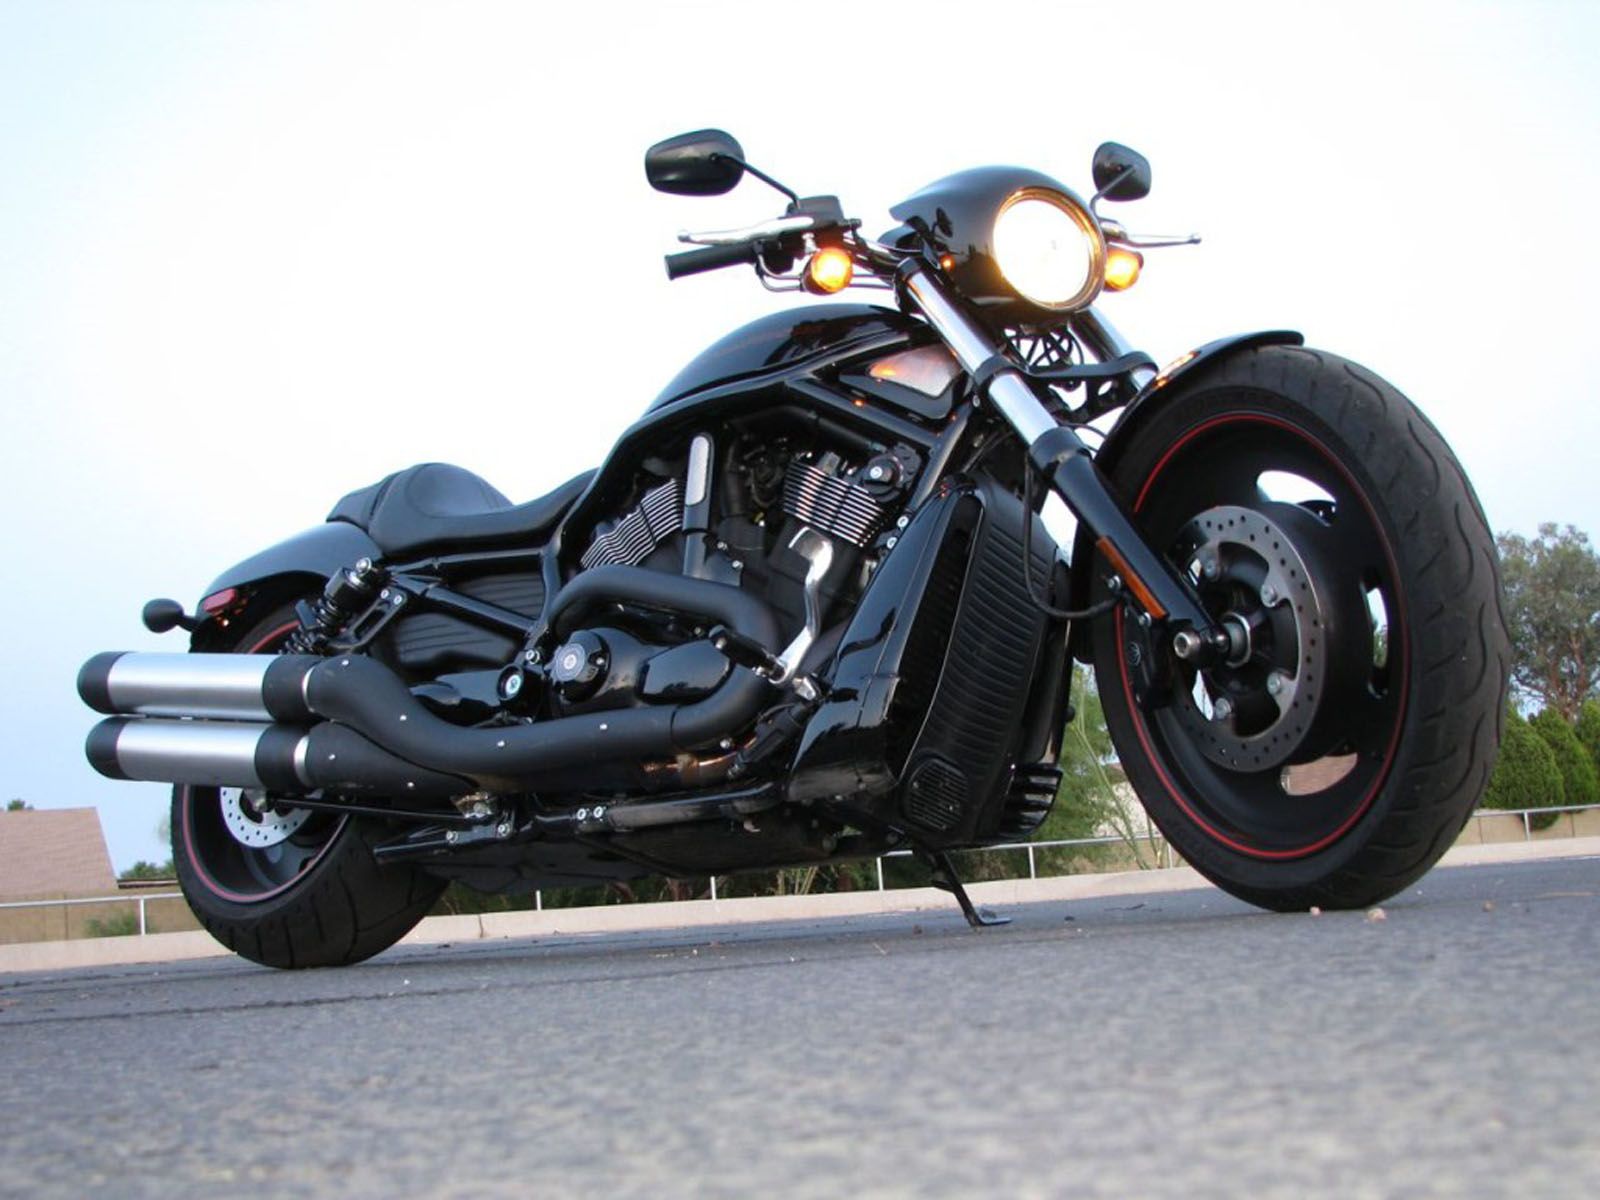 New Harley Davidson Bike Wallpapers | Full HD Pictures